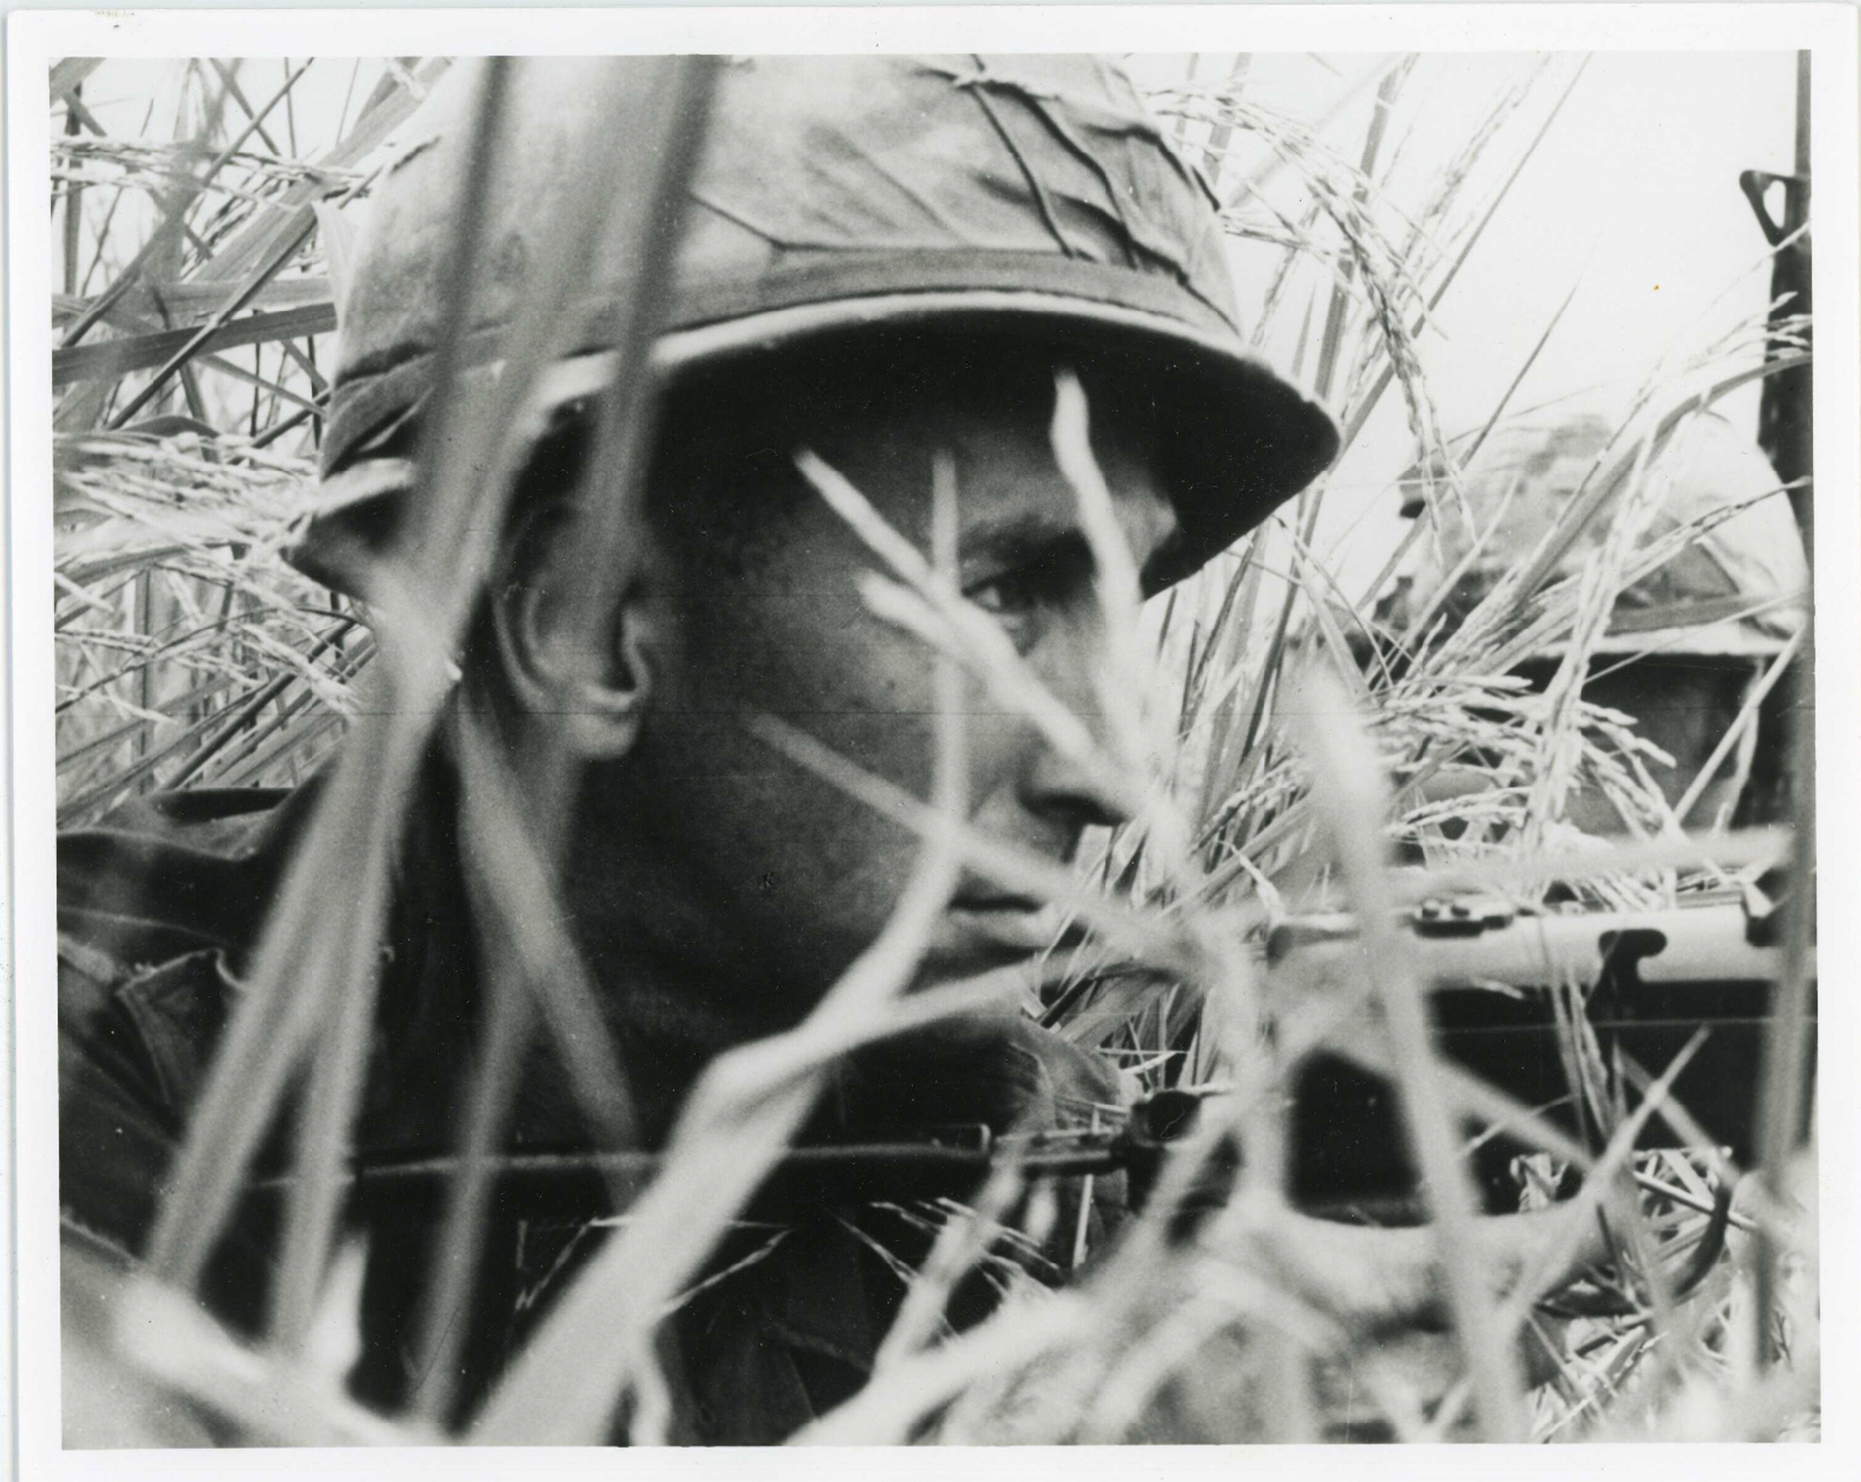 Ellsberg in Vietnam, 1966. 

Courtesy Daniel Ellsberg Papers, Robert S. Cox Special Collections and University Archives Research Center, UMass Amherst Libraries.